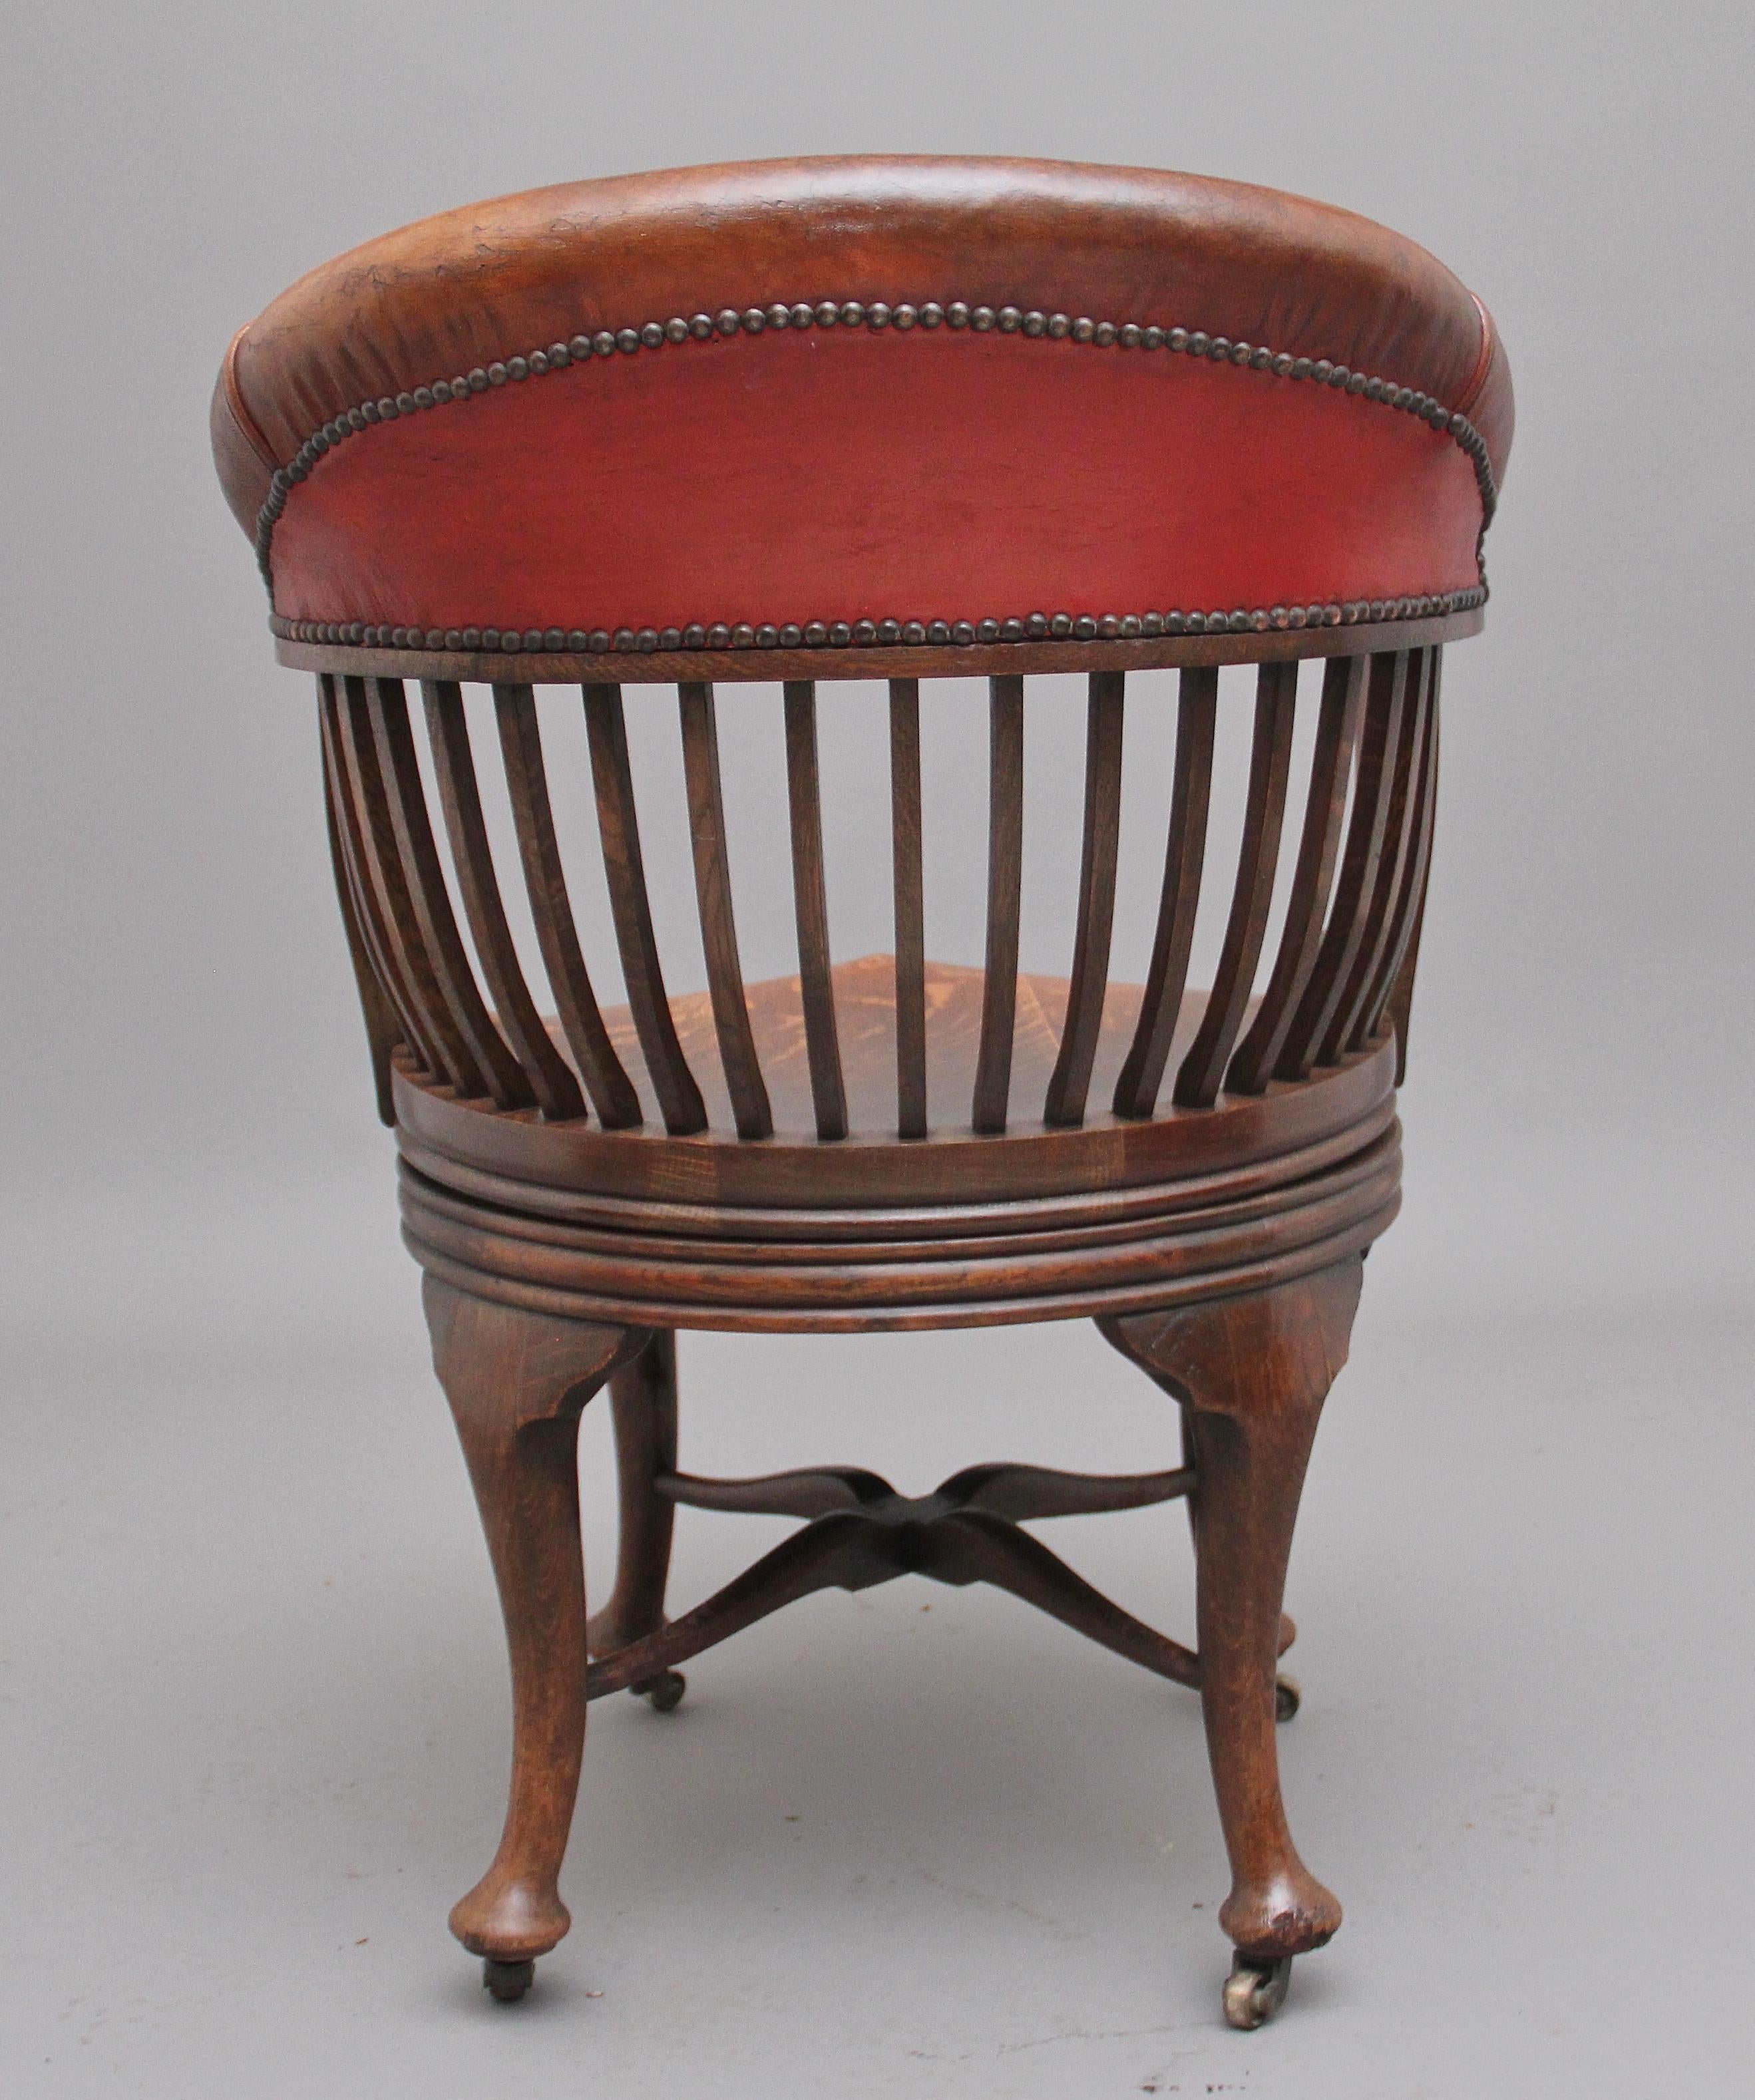 British 19th Century Oak and Leather Swivel Desk Chair